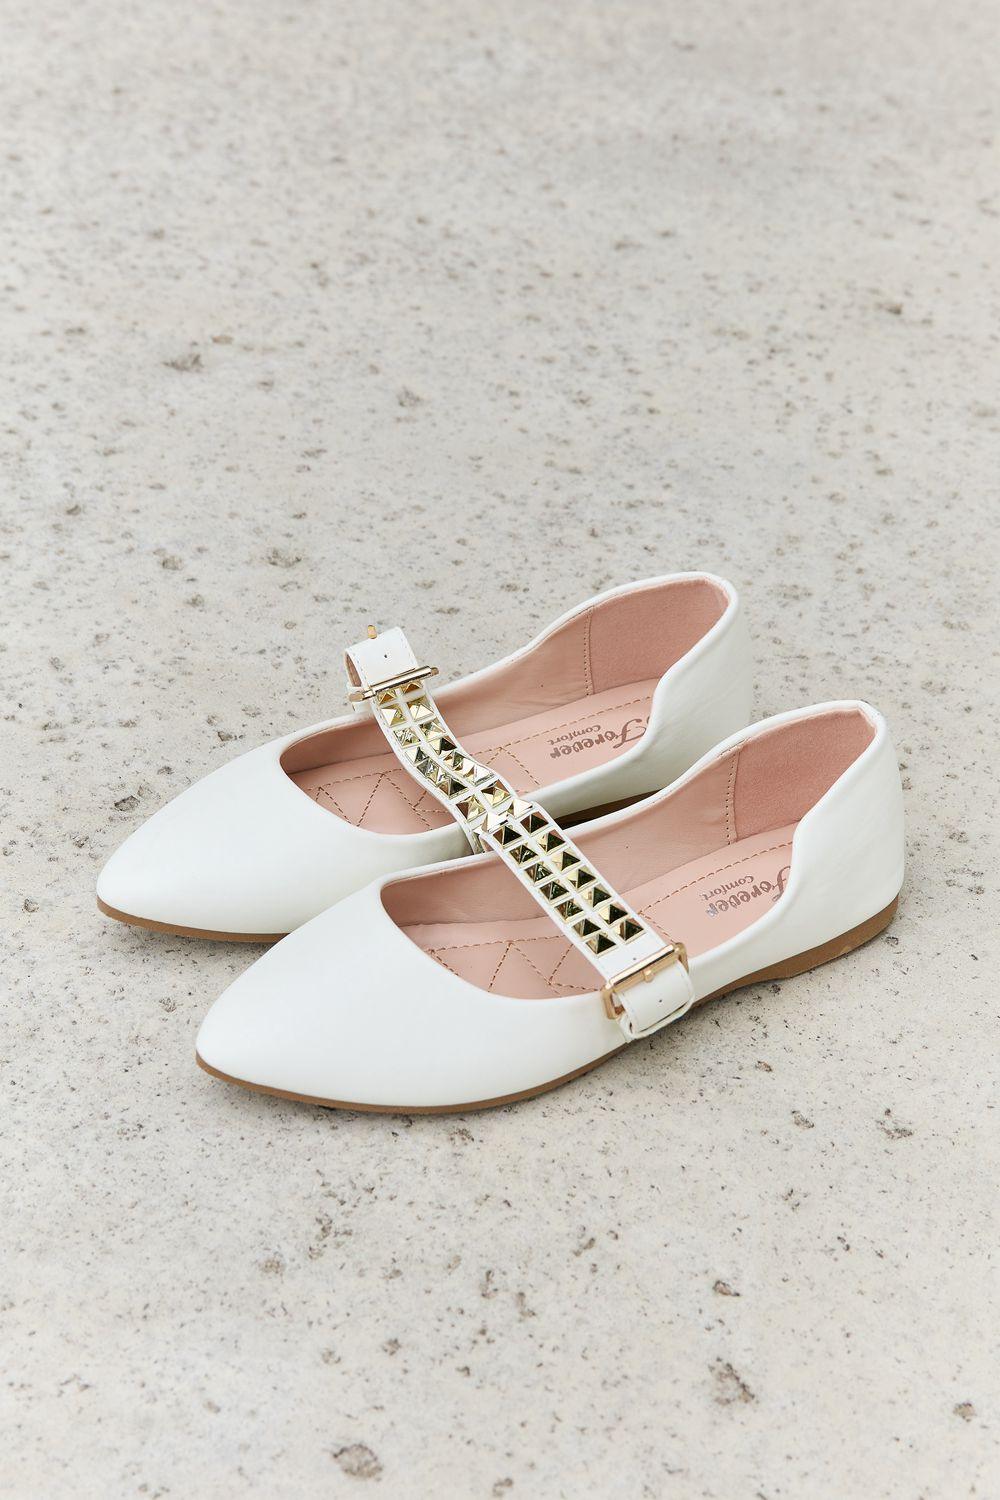 Women's Shoes - Flats White Pointed Toe Studded Ballet Flats